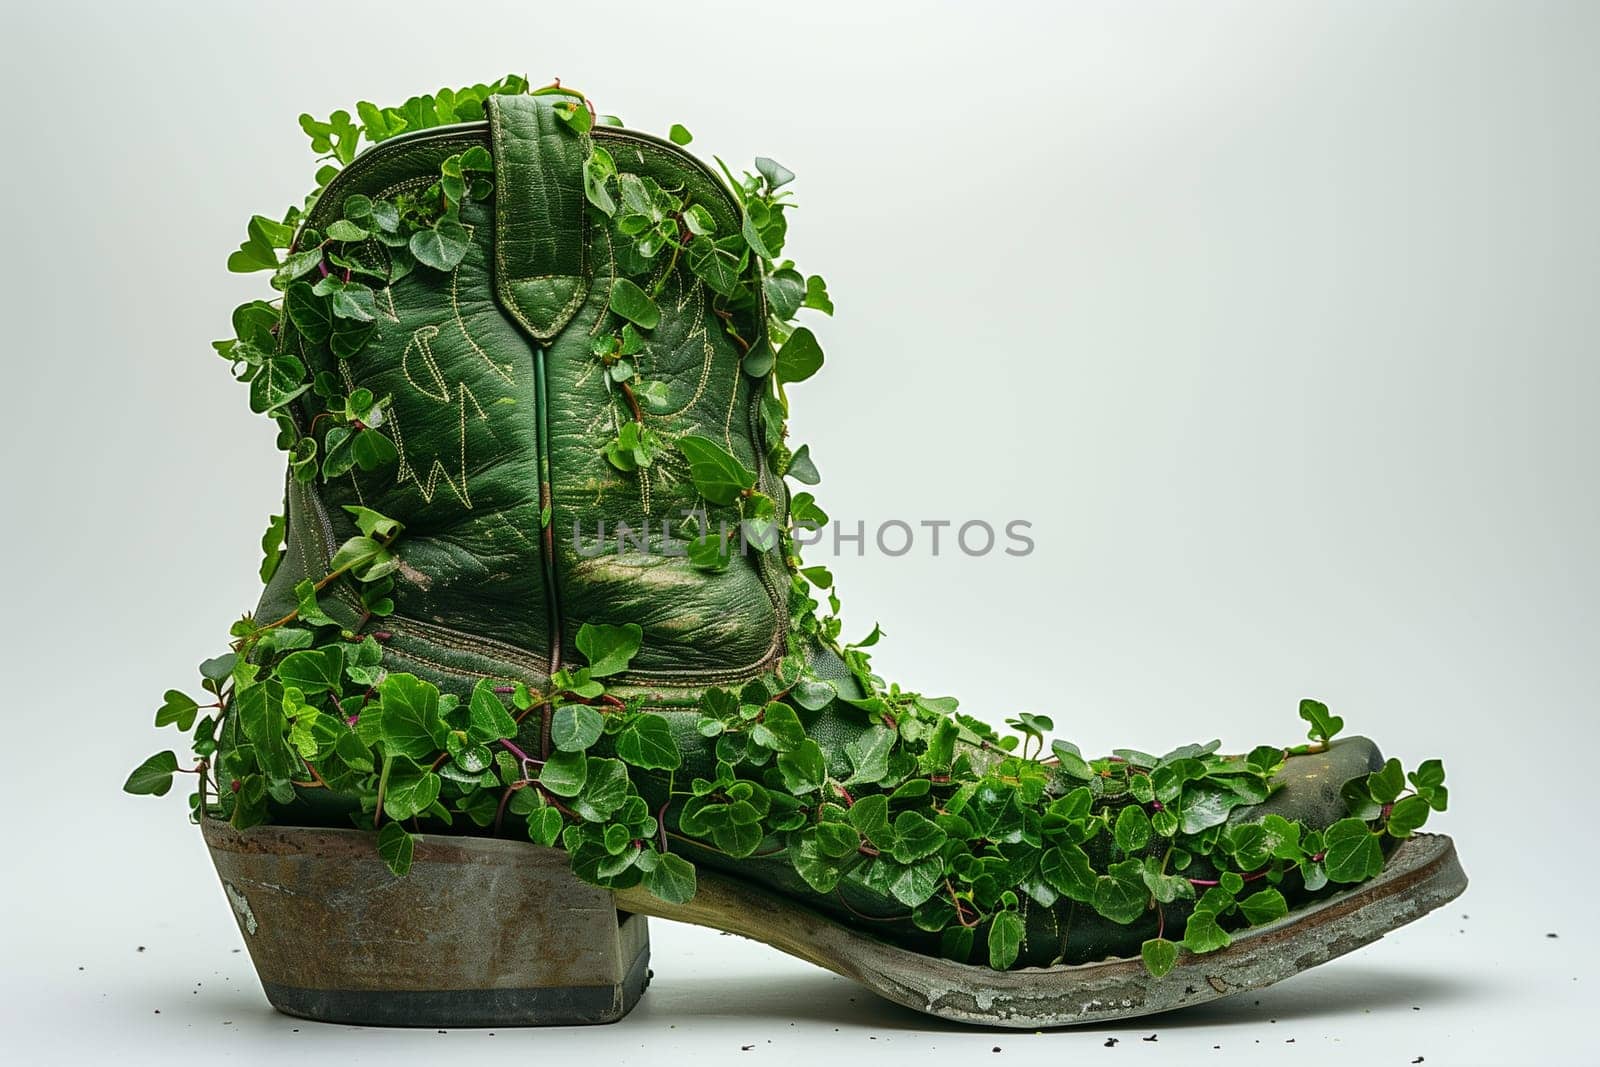 Boots Overgrown With Plants by Sd28DimoN_1976